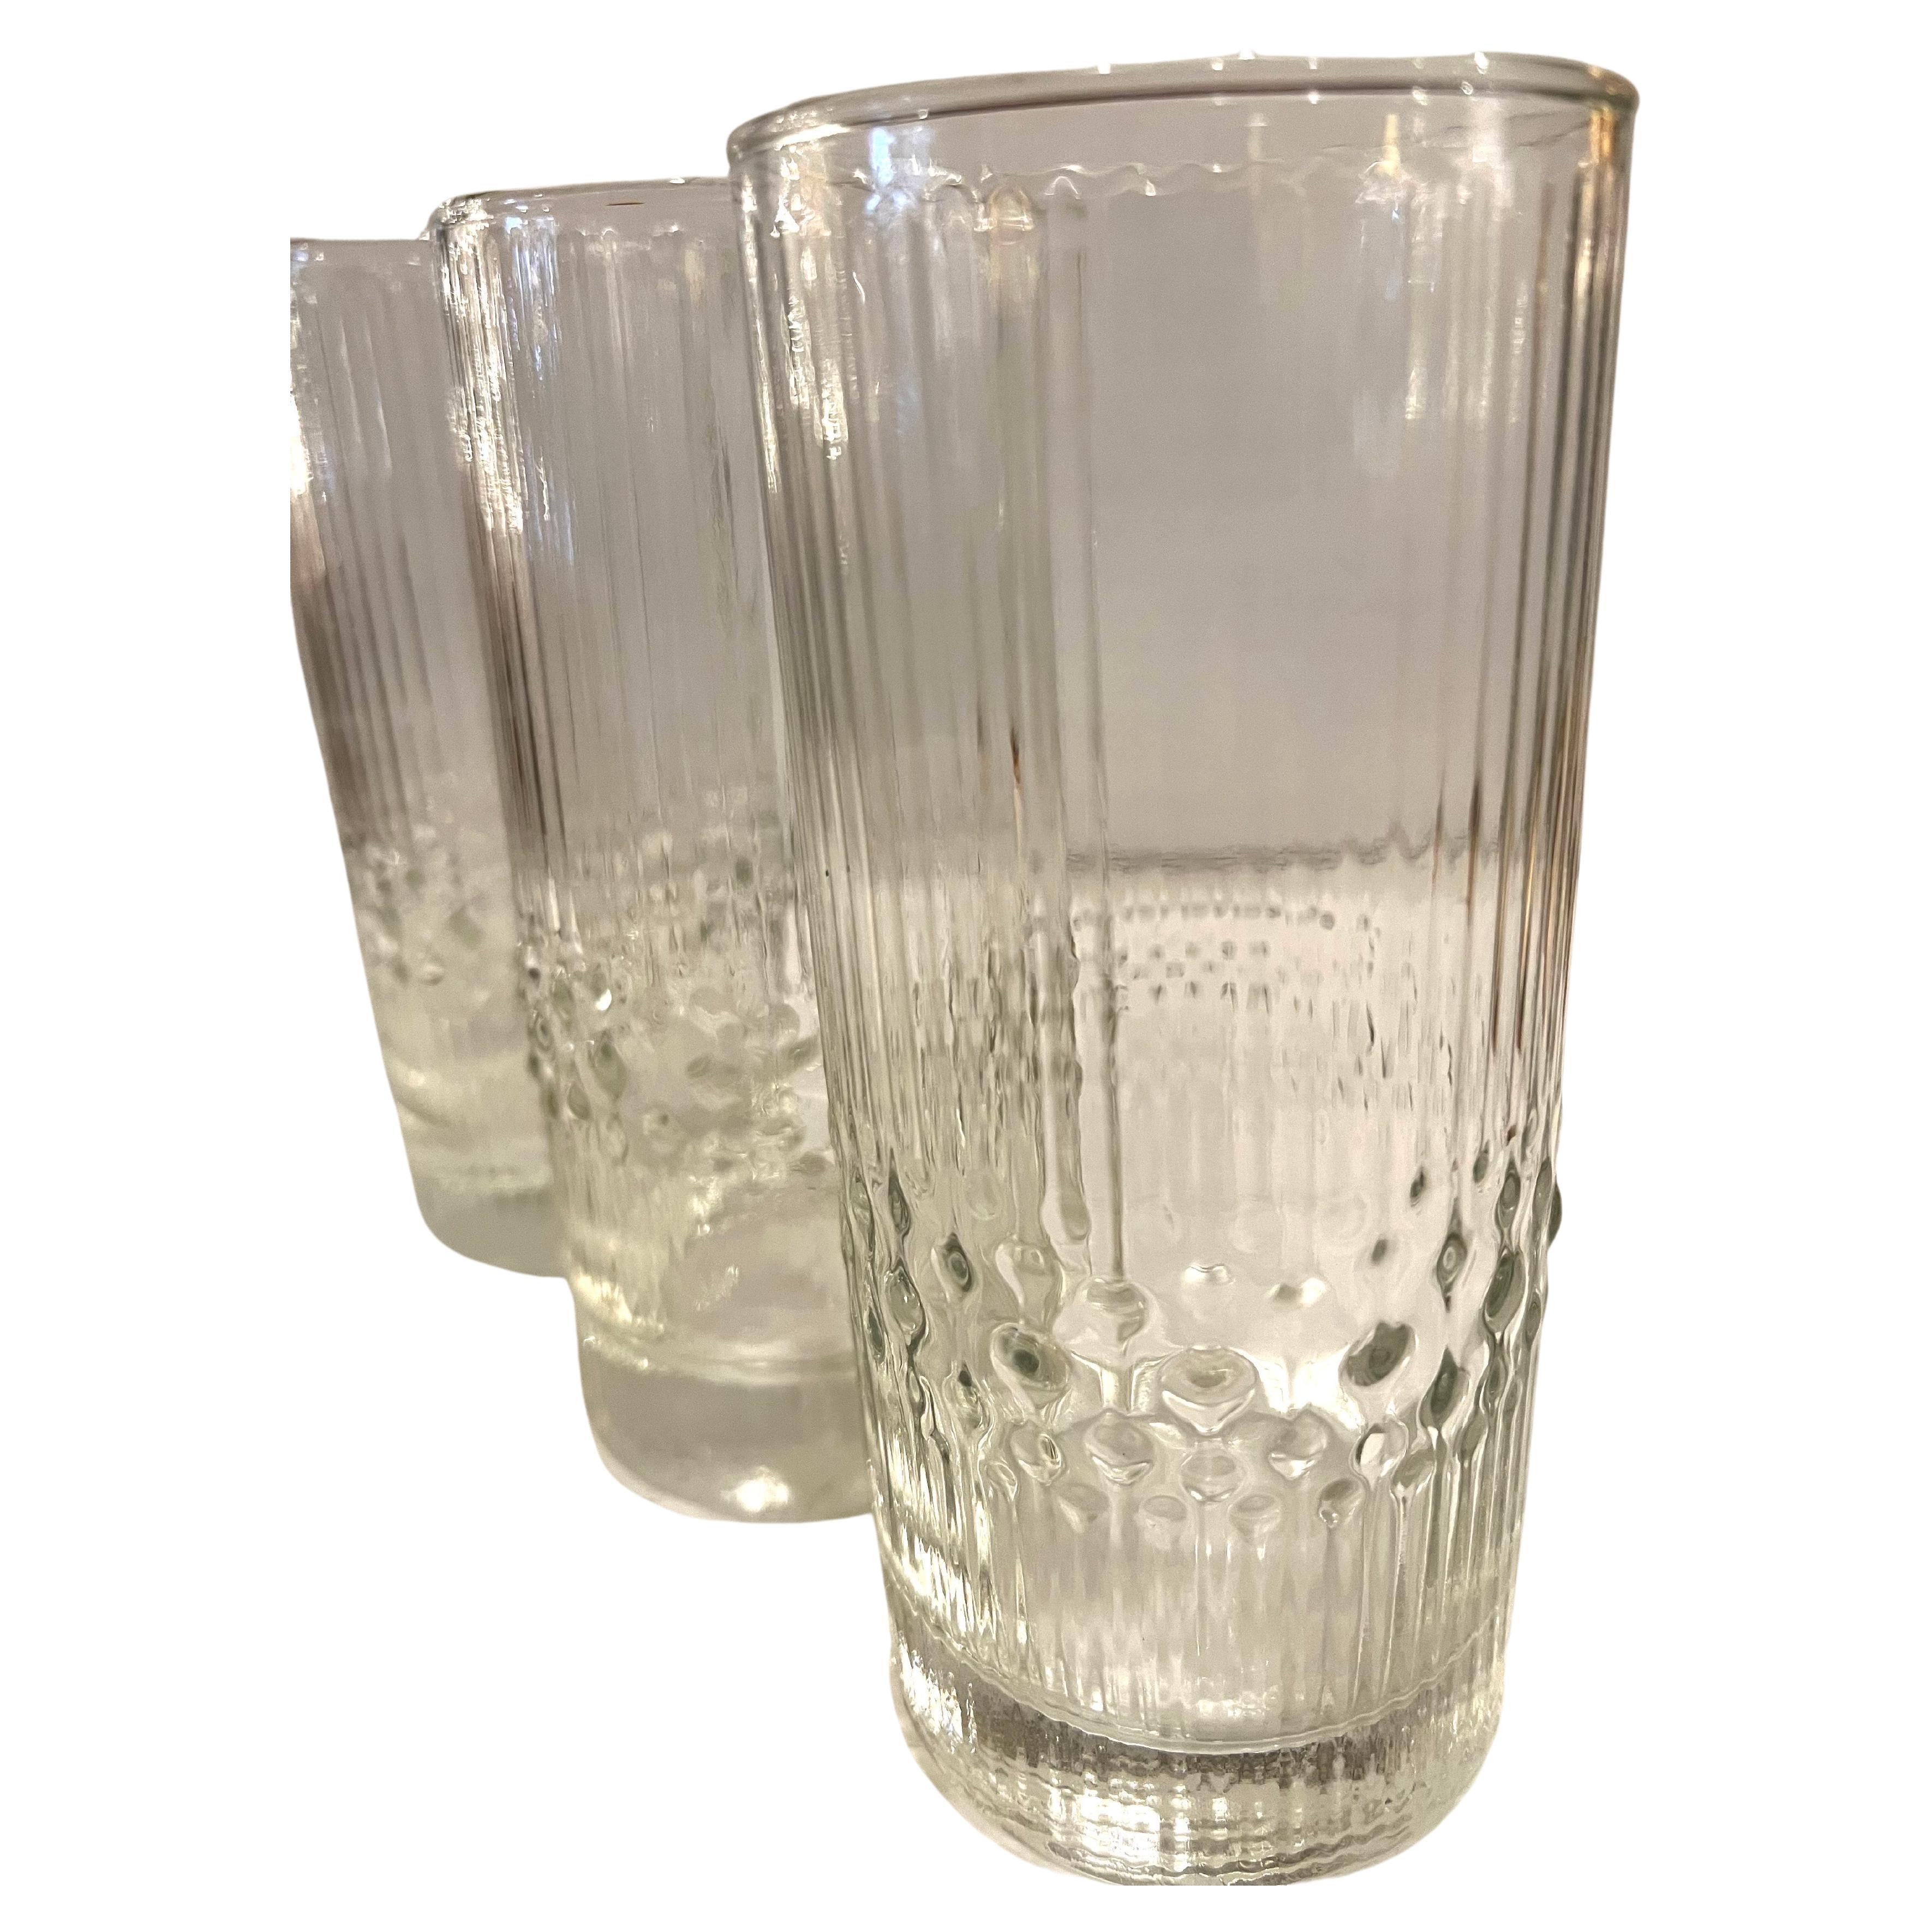 beautiful set of 4 glasses by Tapio Wirkkala textured glasses. Excellent condition no chips or cracks.